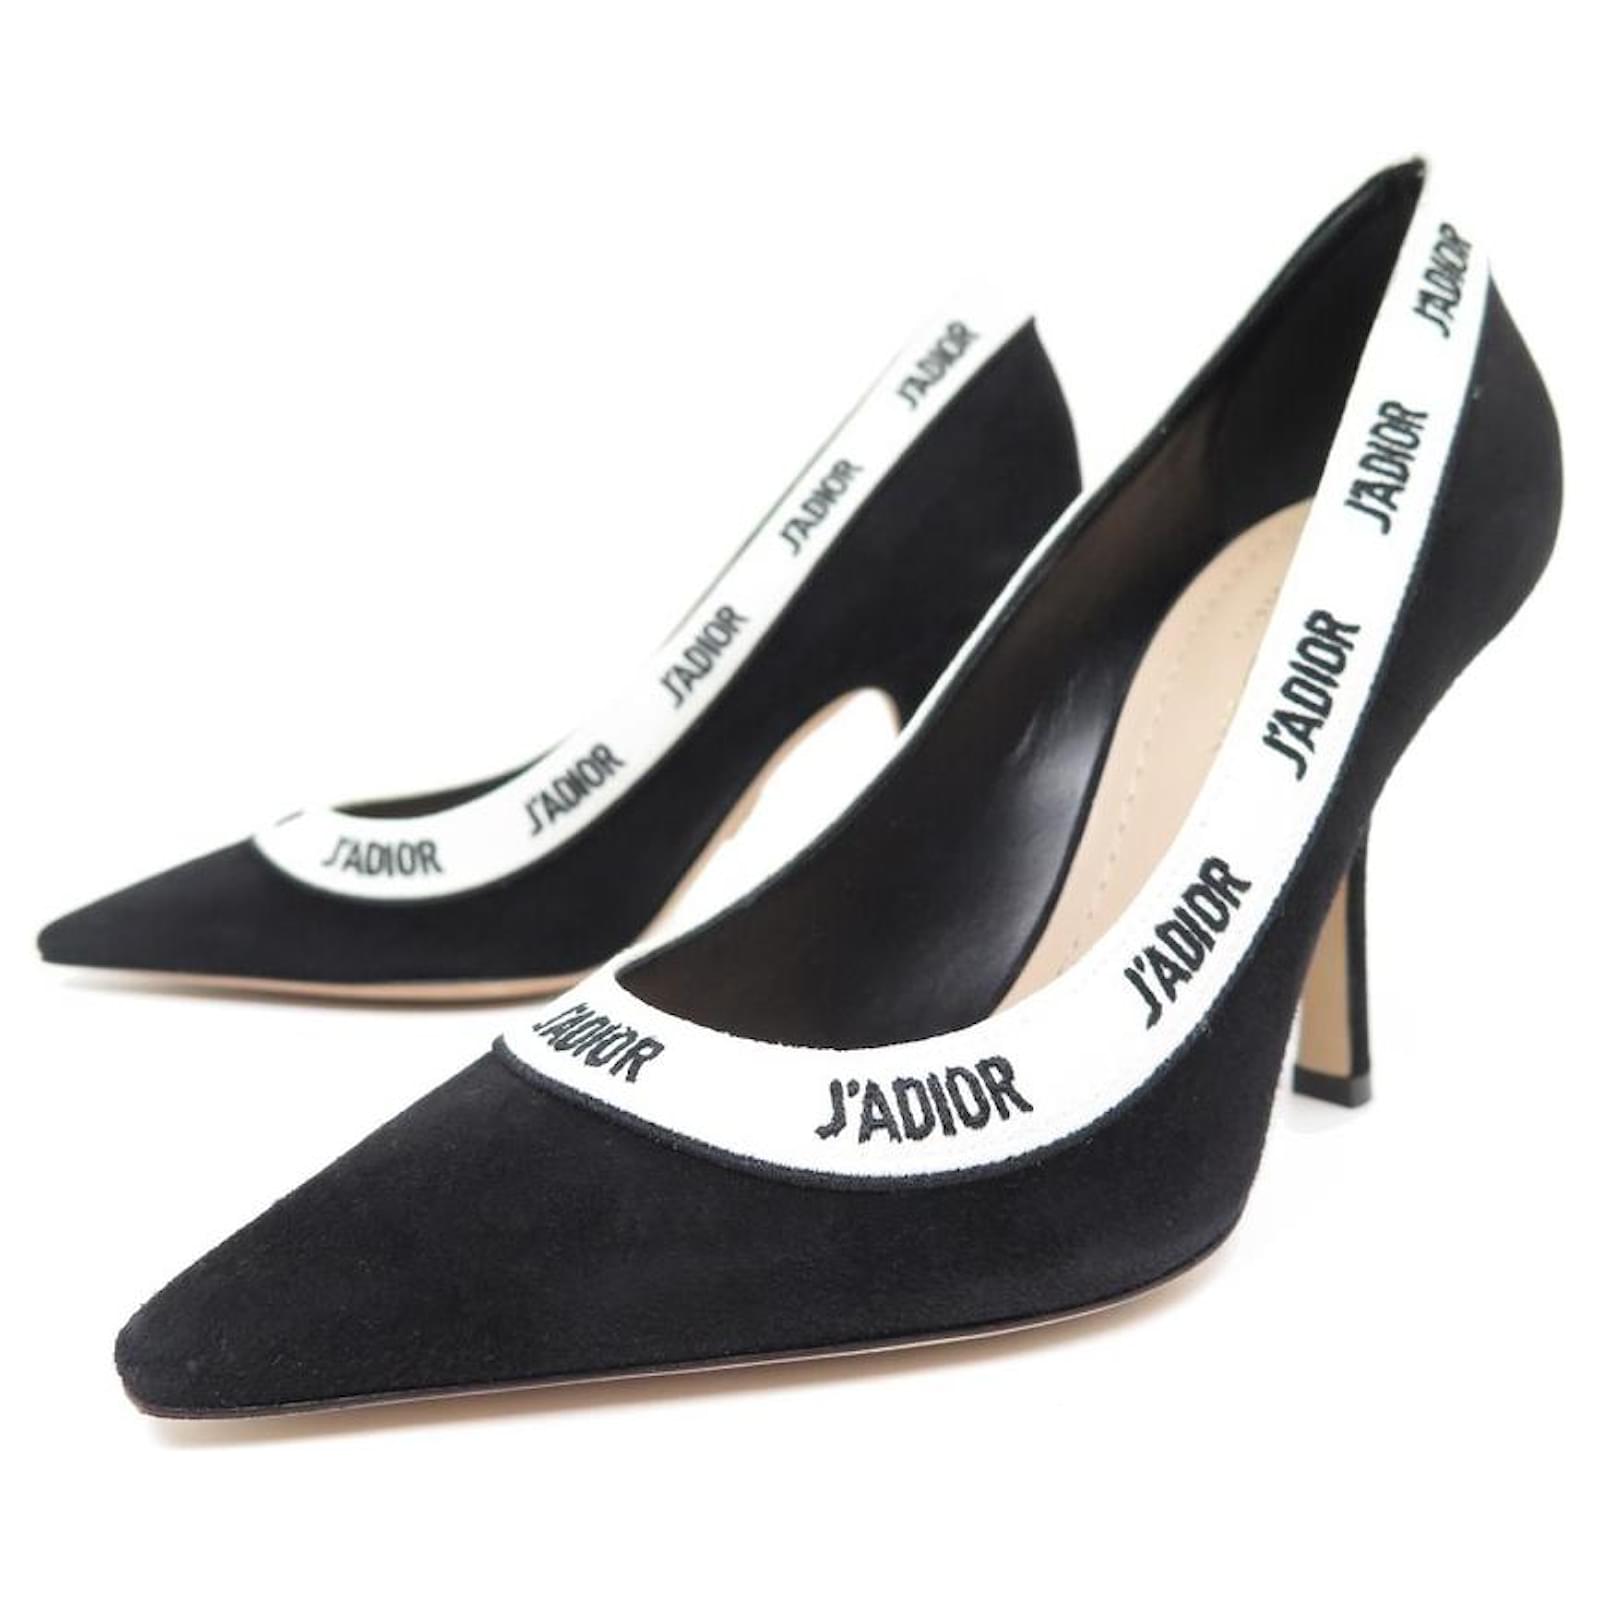 JAdior Slingback Pump White and Black Embroidered Cotton with Toile de  Jouy Voyage Motif  DIOR